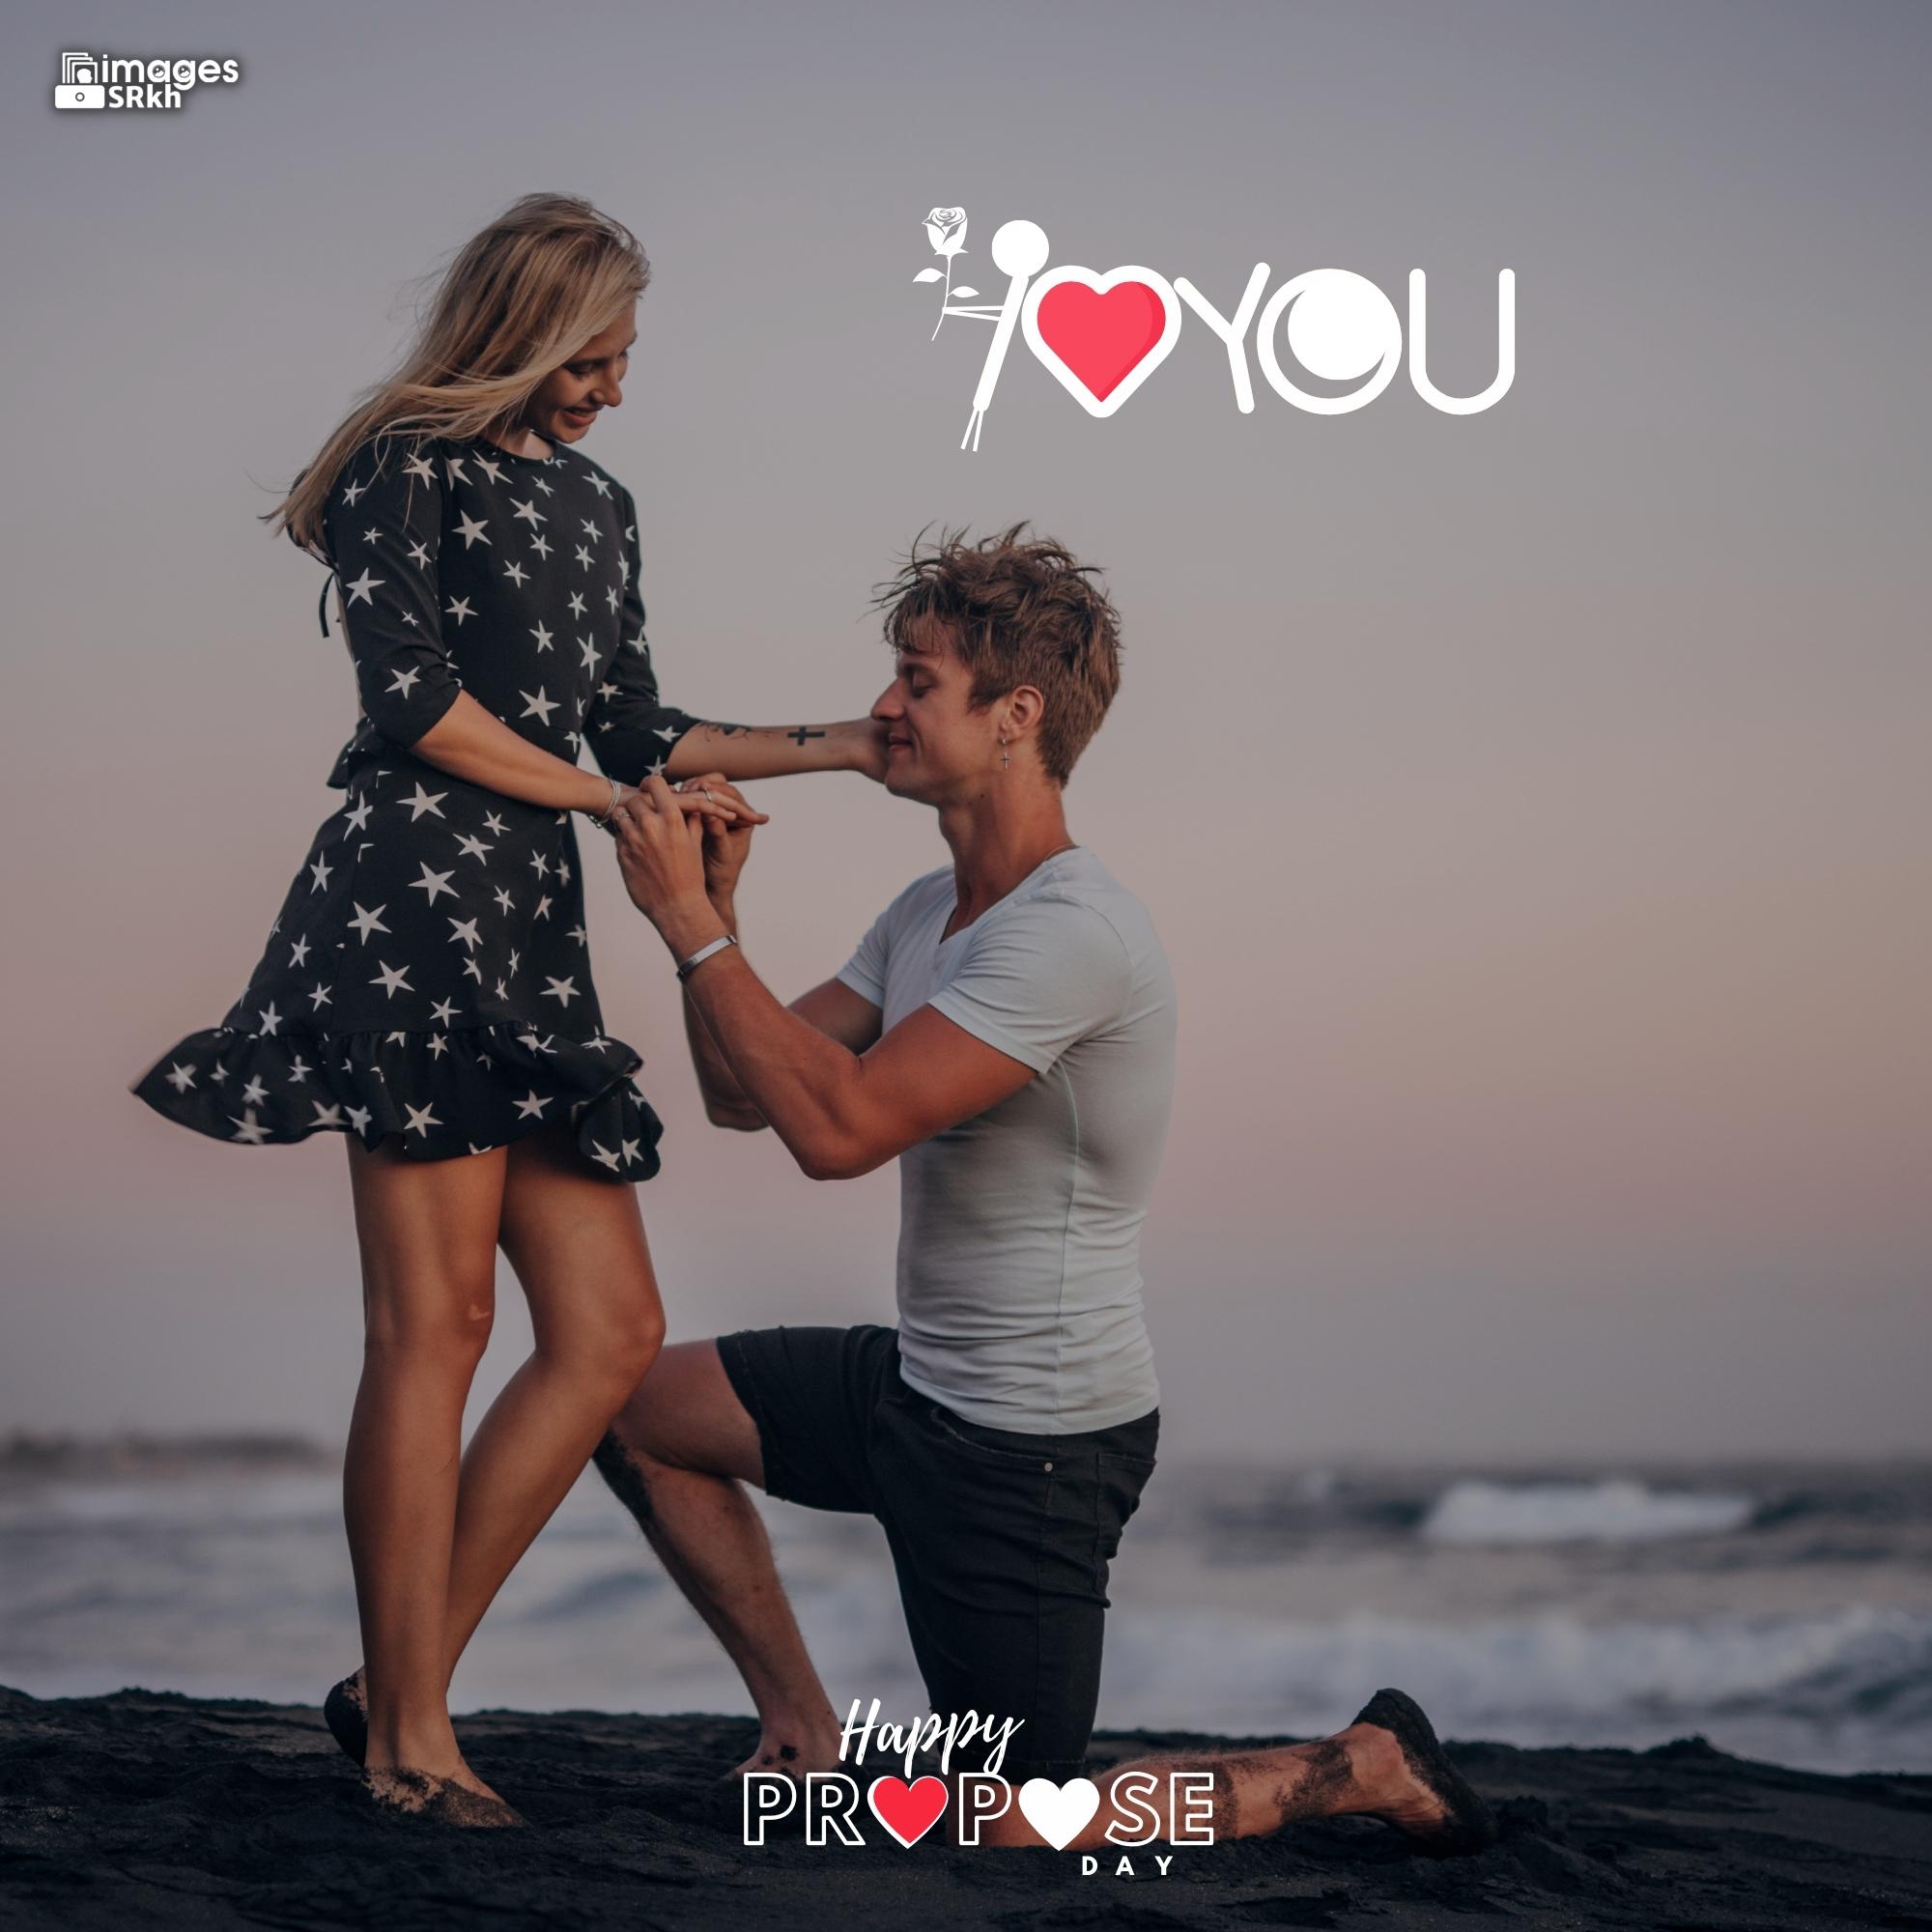 Happy Propose Day Images | 324 | I LOVE YOU